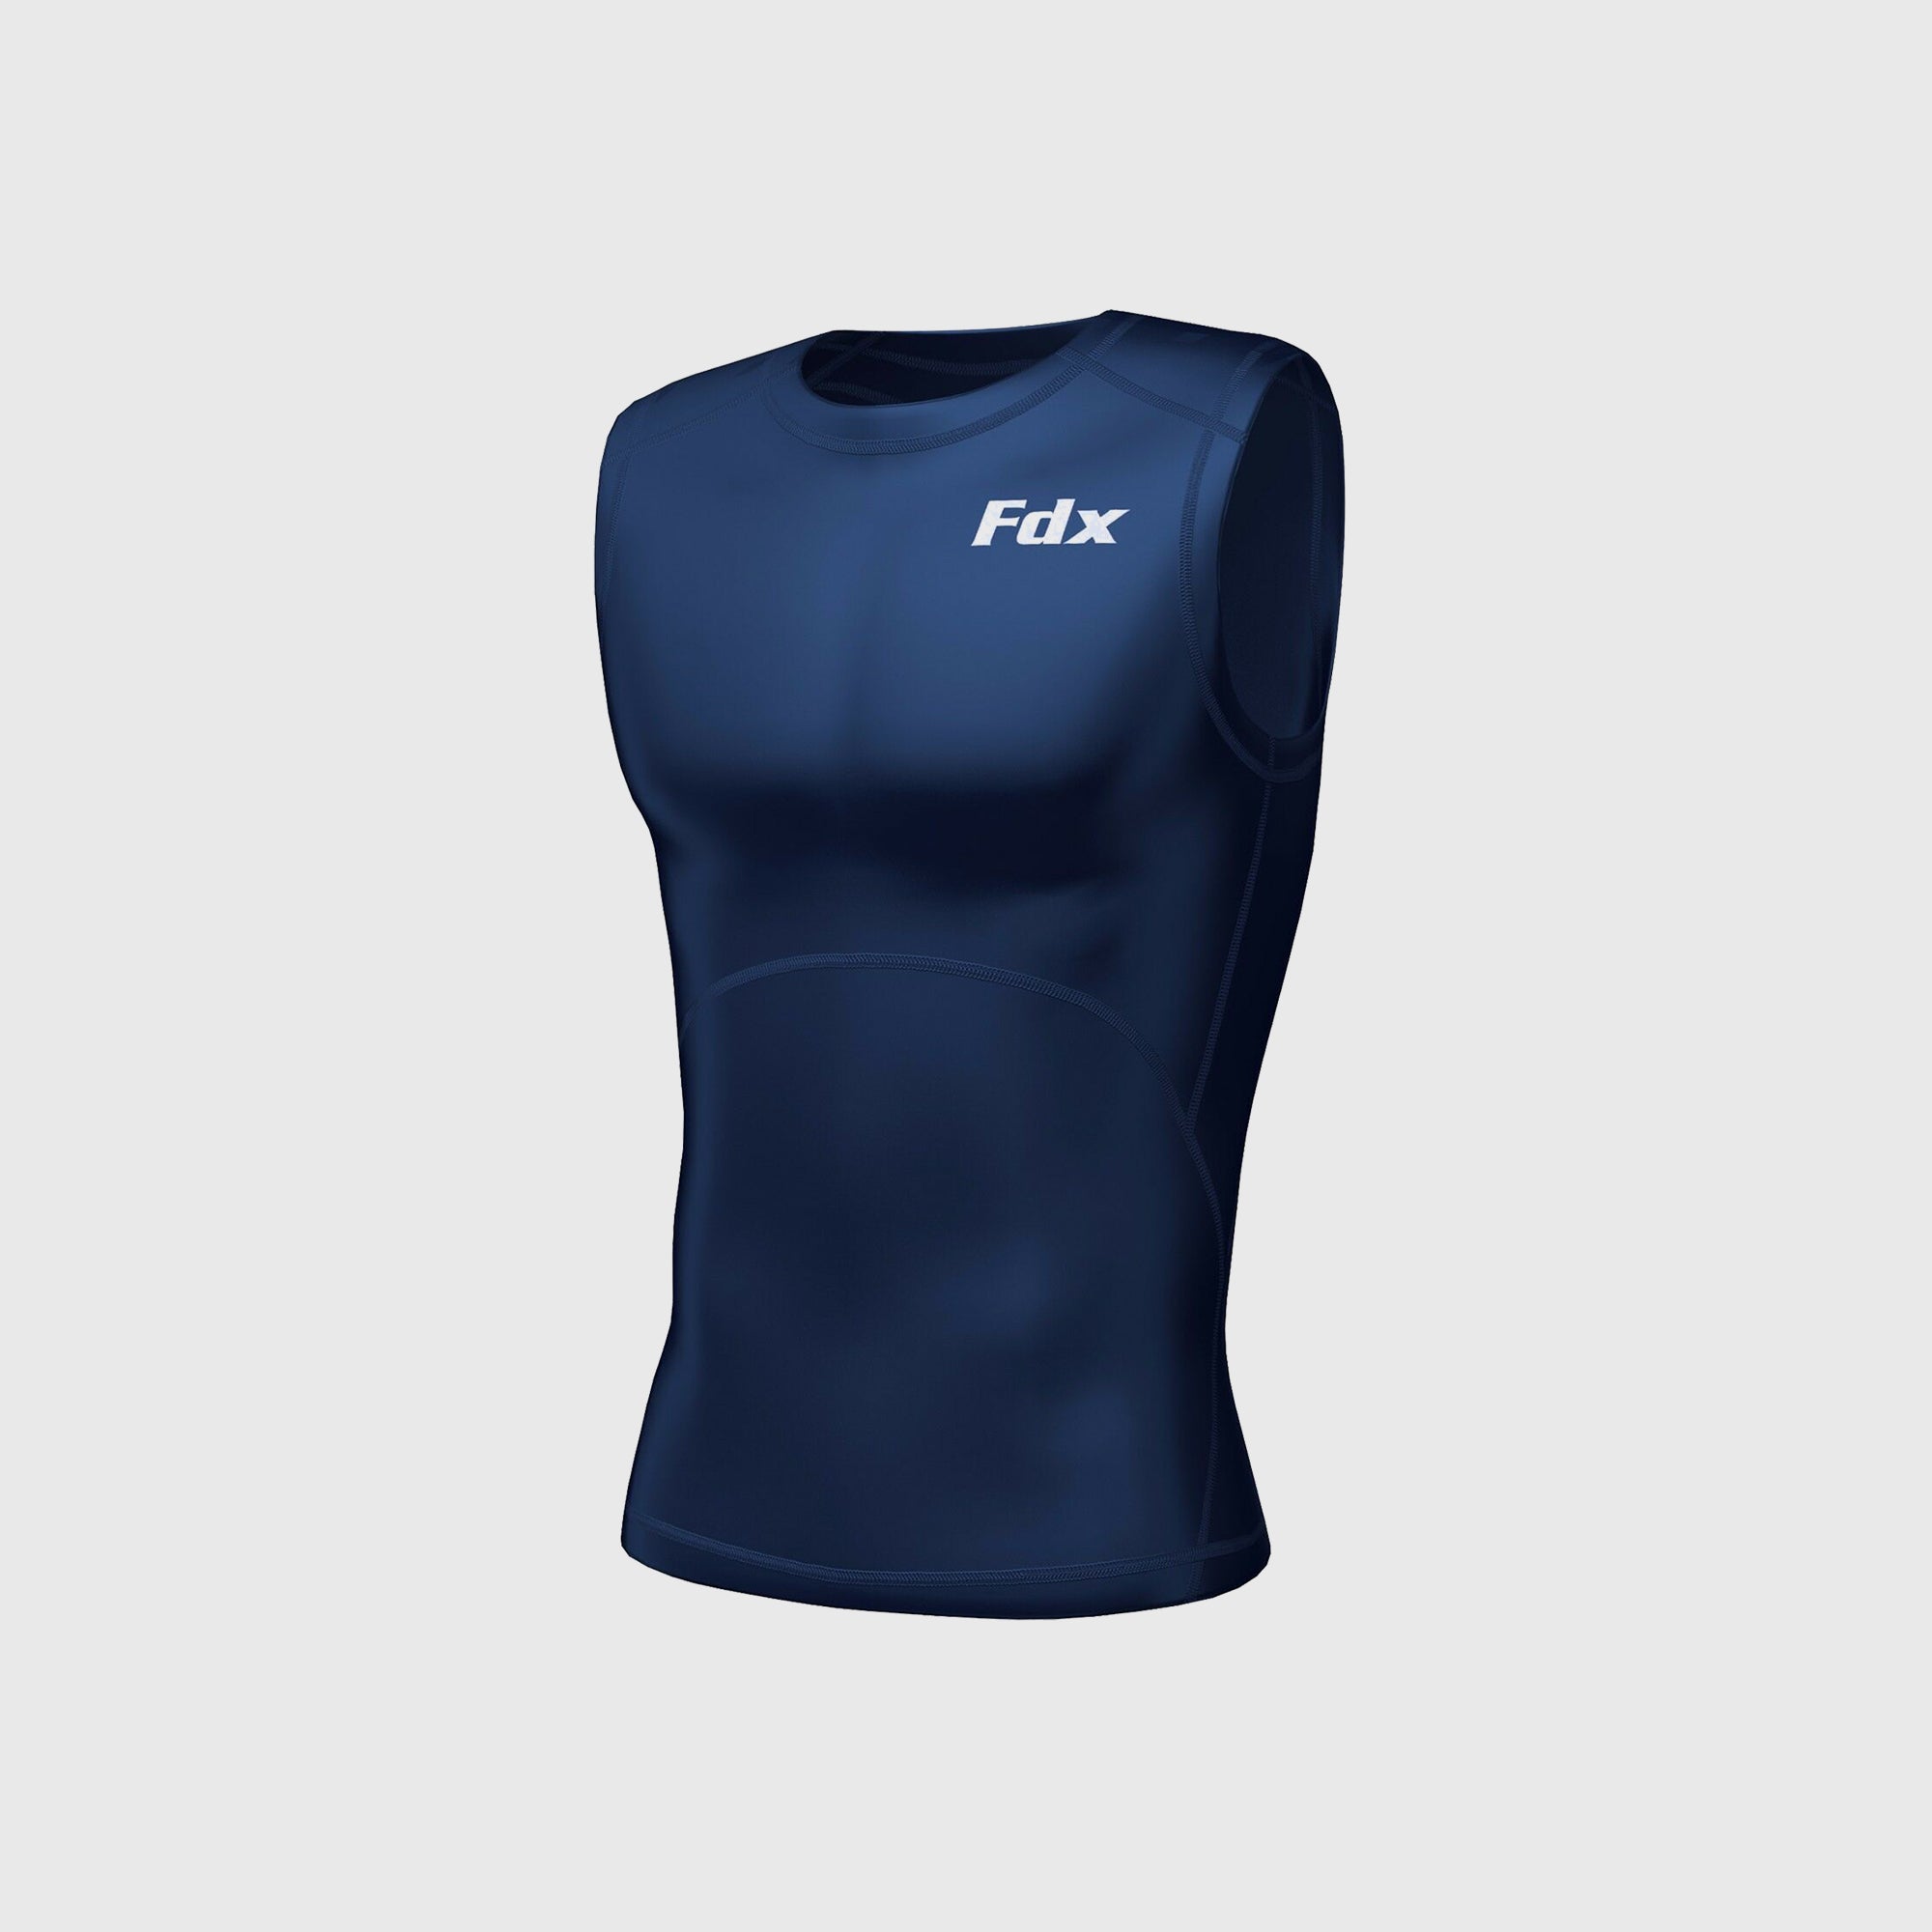 Fdx Compression Sleeveless Top for Men's Navy Blue Running Gym Workout Wear Rash Guard Stretchable Breathable - Aeroform